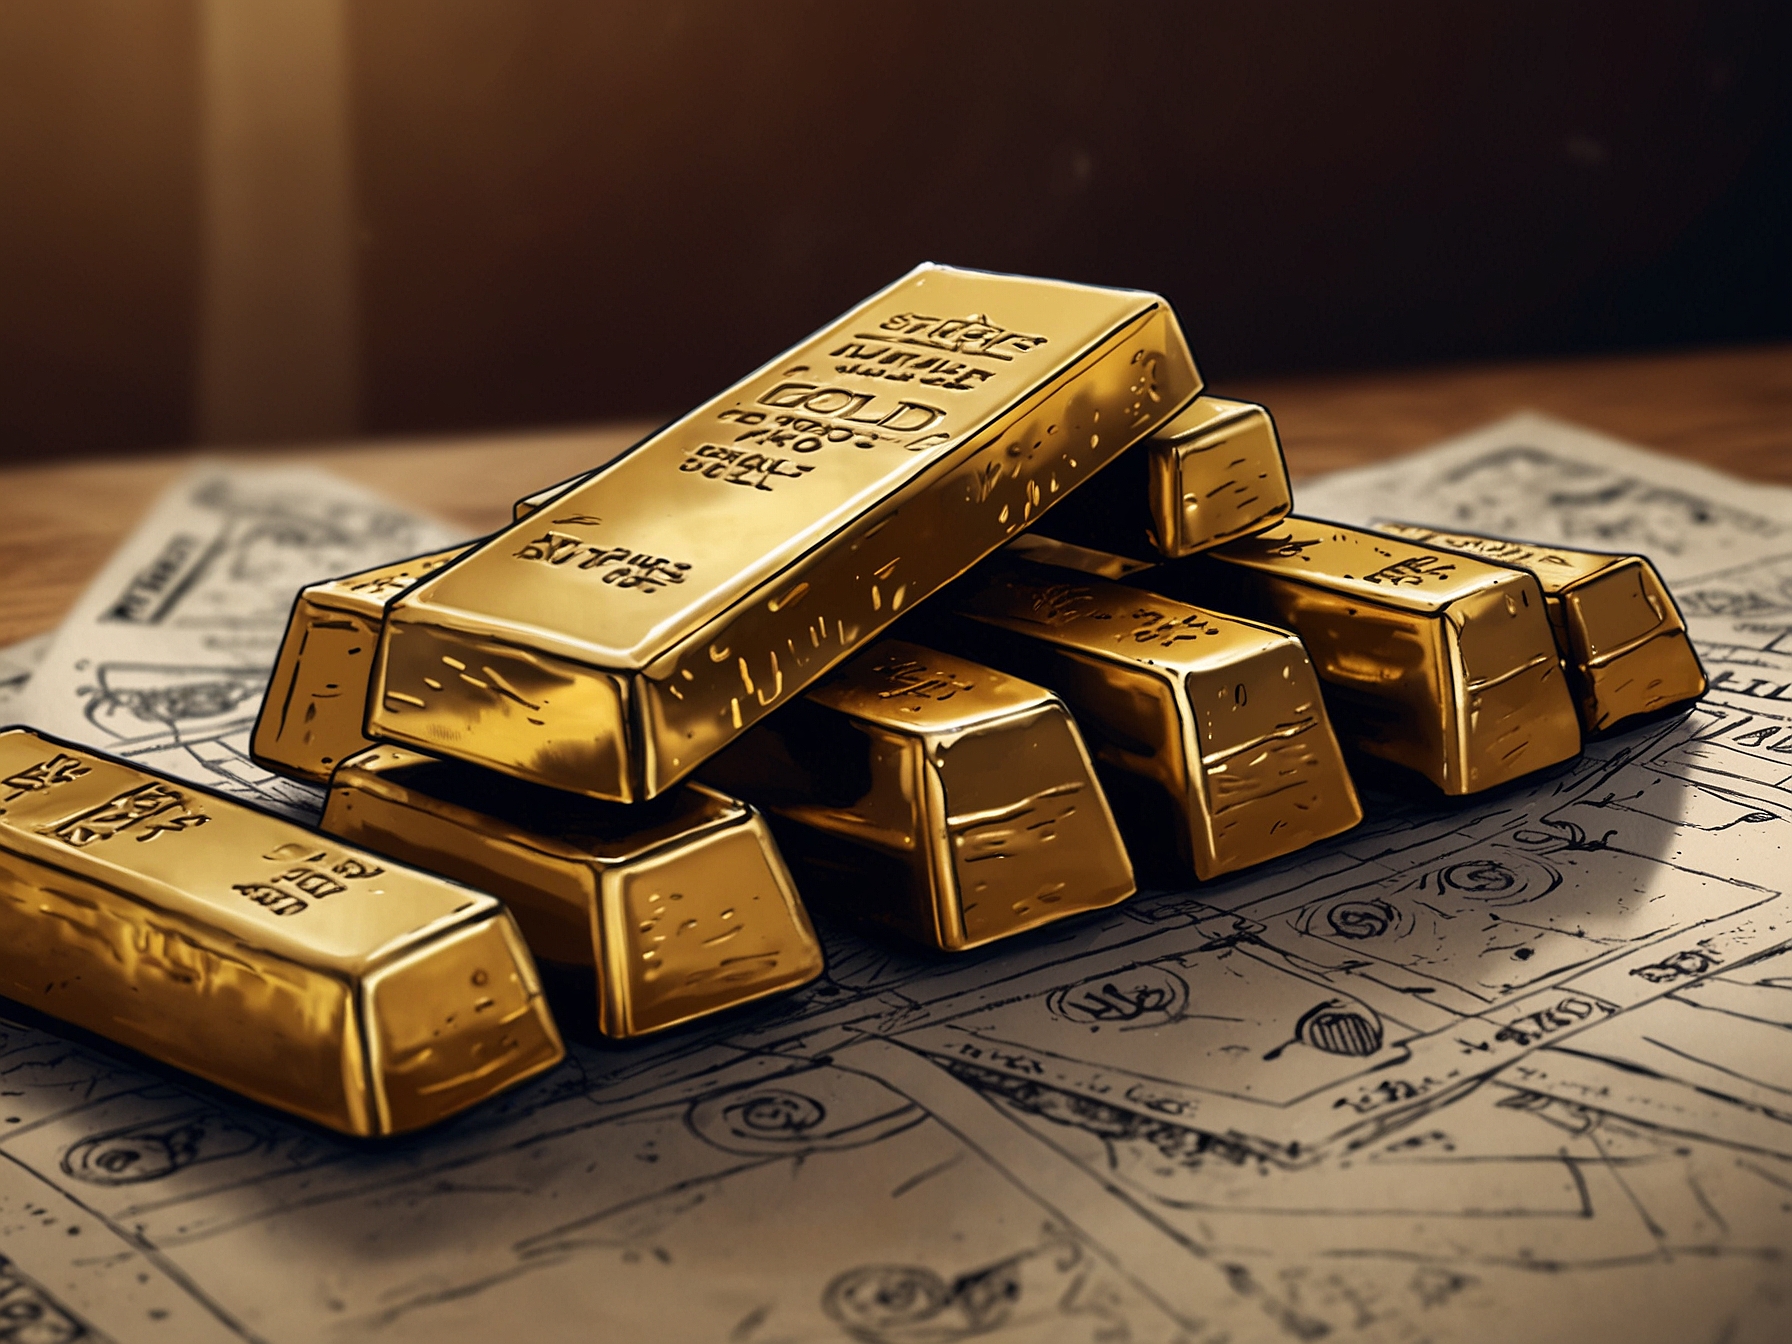 An illustration depicting gold bars and coins, symbolizing the rising value of gold as a safe-haven asset amid economic uncertainty and potential Federal Reserve rate cuts.